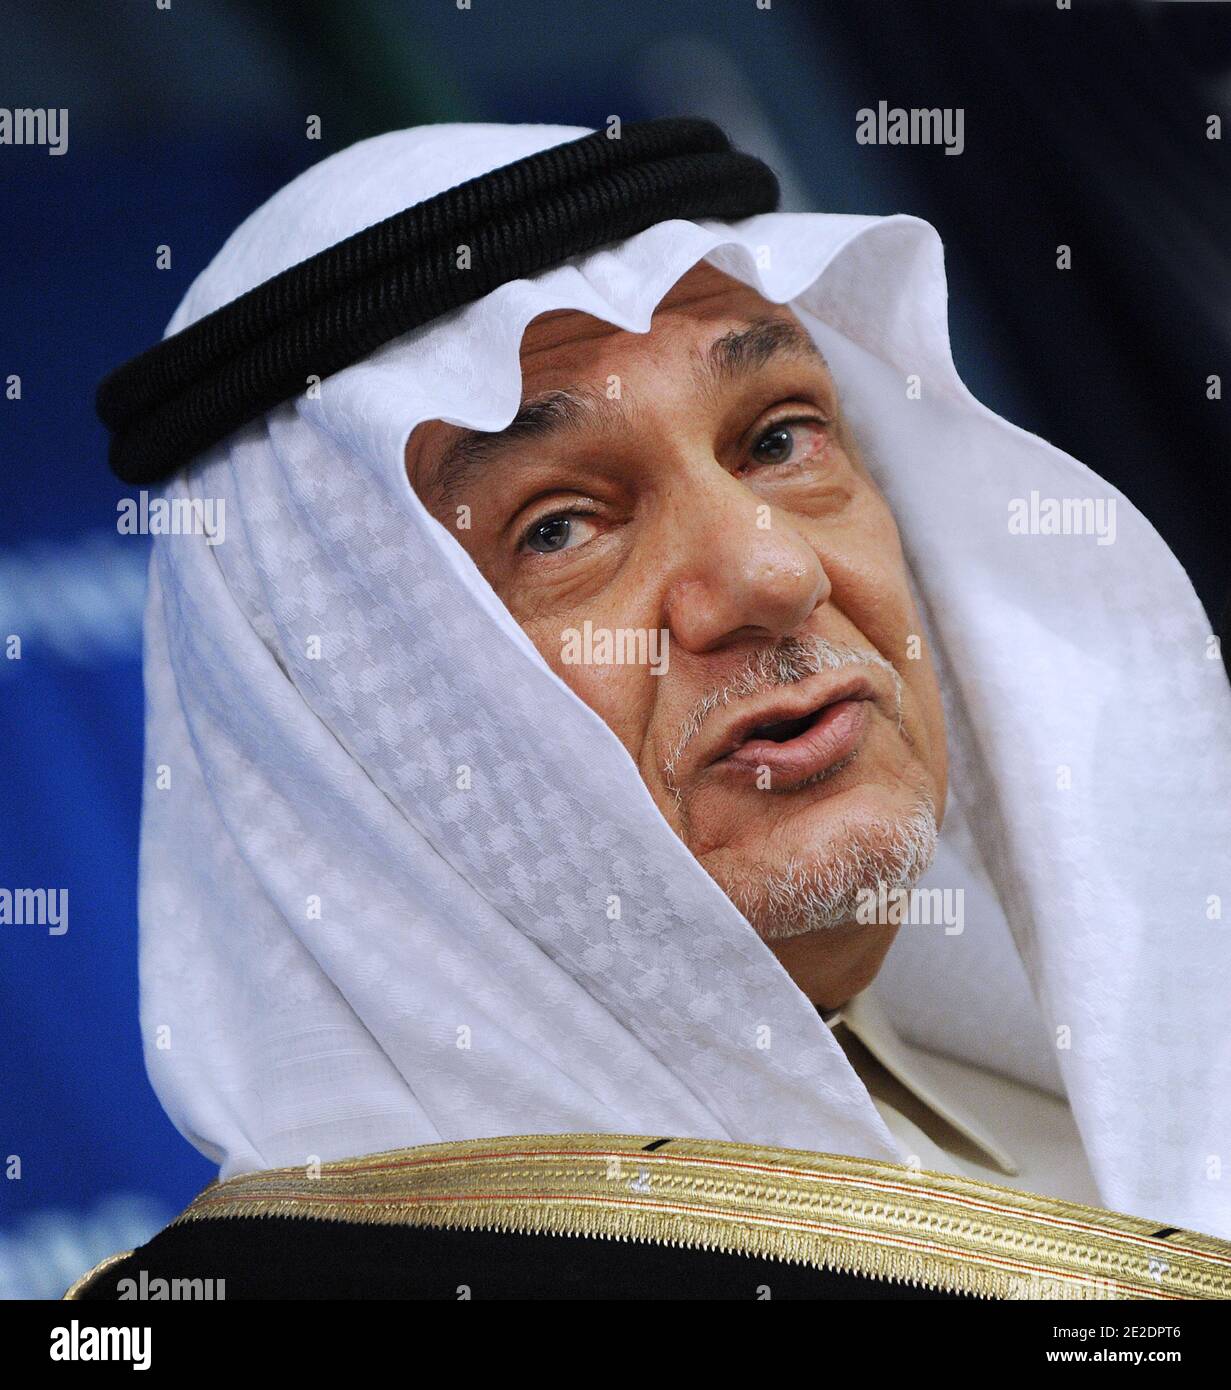 Prince Turki Al Faisal of Saudi Arabia speaks at the National Press Club November 15, 2011 in Washington, DC. Prince Turki Al Faisal spoke about the alleged Iranian plot to assassinate the Saudi Arabian ambassador to the United States, the evolving role and rights of women in Saudi Arabia, and Saudi Arabia's support for Palestinian UN membership and statehood recognition.Photo by Olivier Douliery/ABACAPRESS.COM Stock Photo